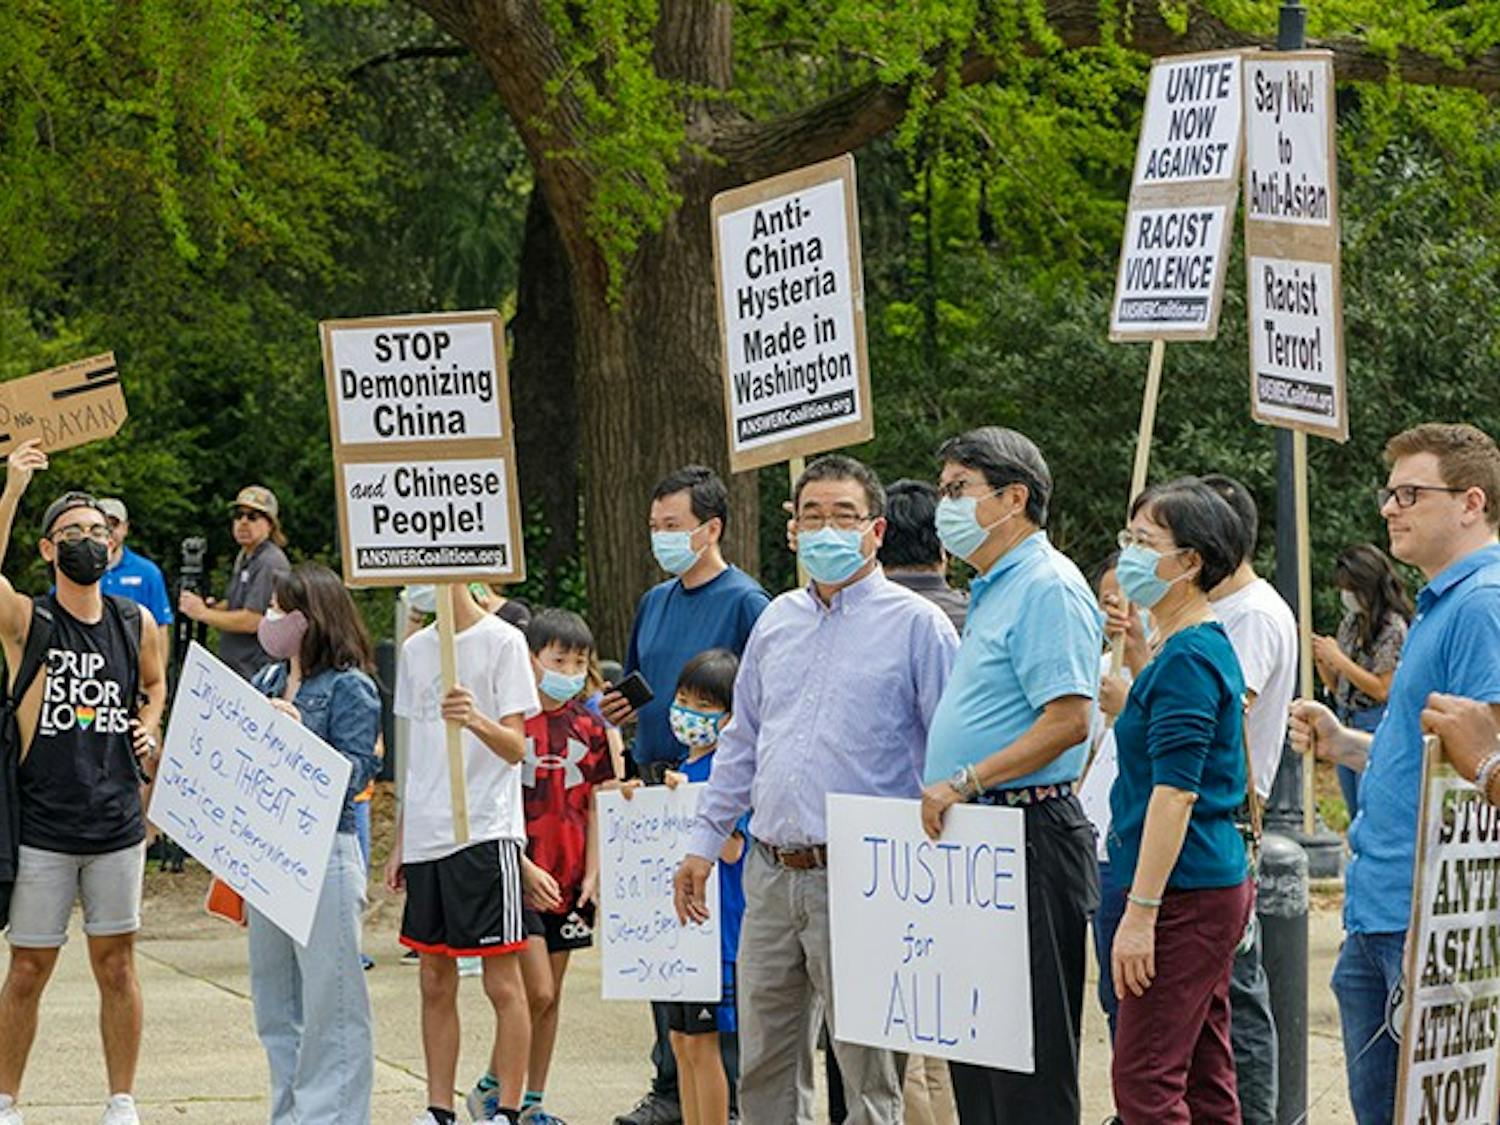  A group holds signs in protest of Asian hate that is happening within Asian communities.
